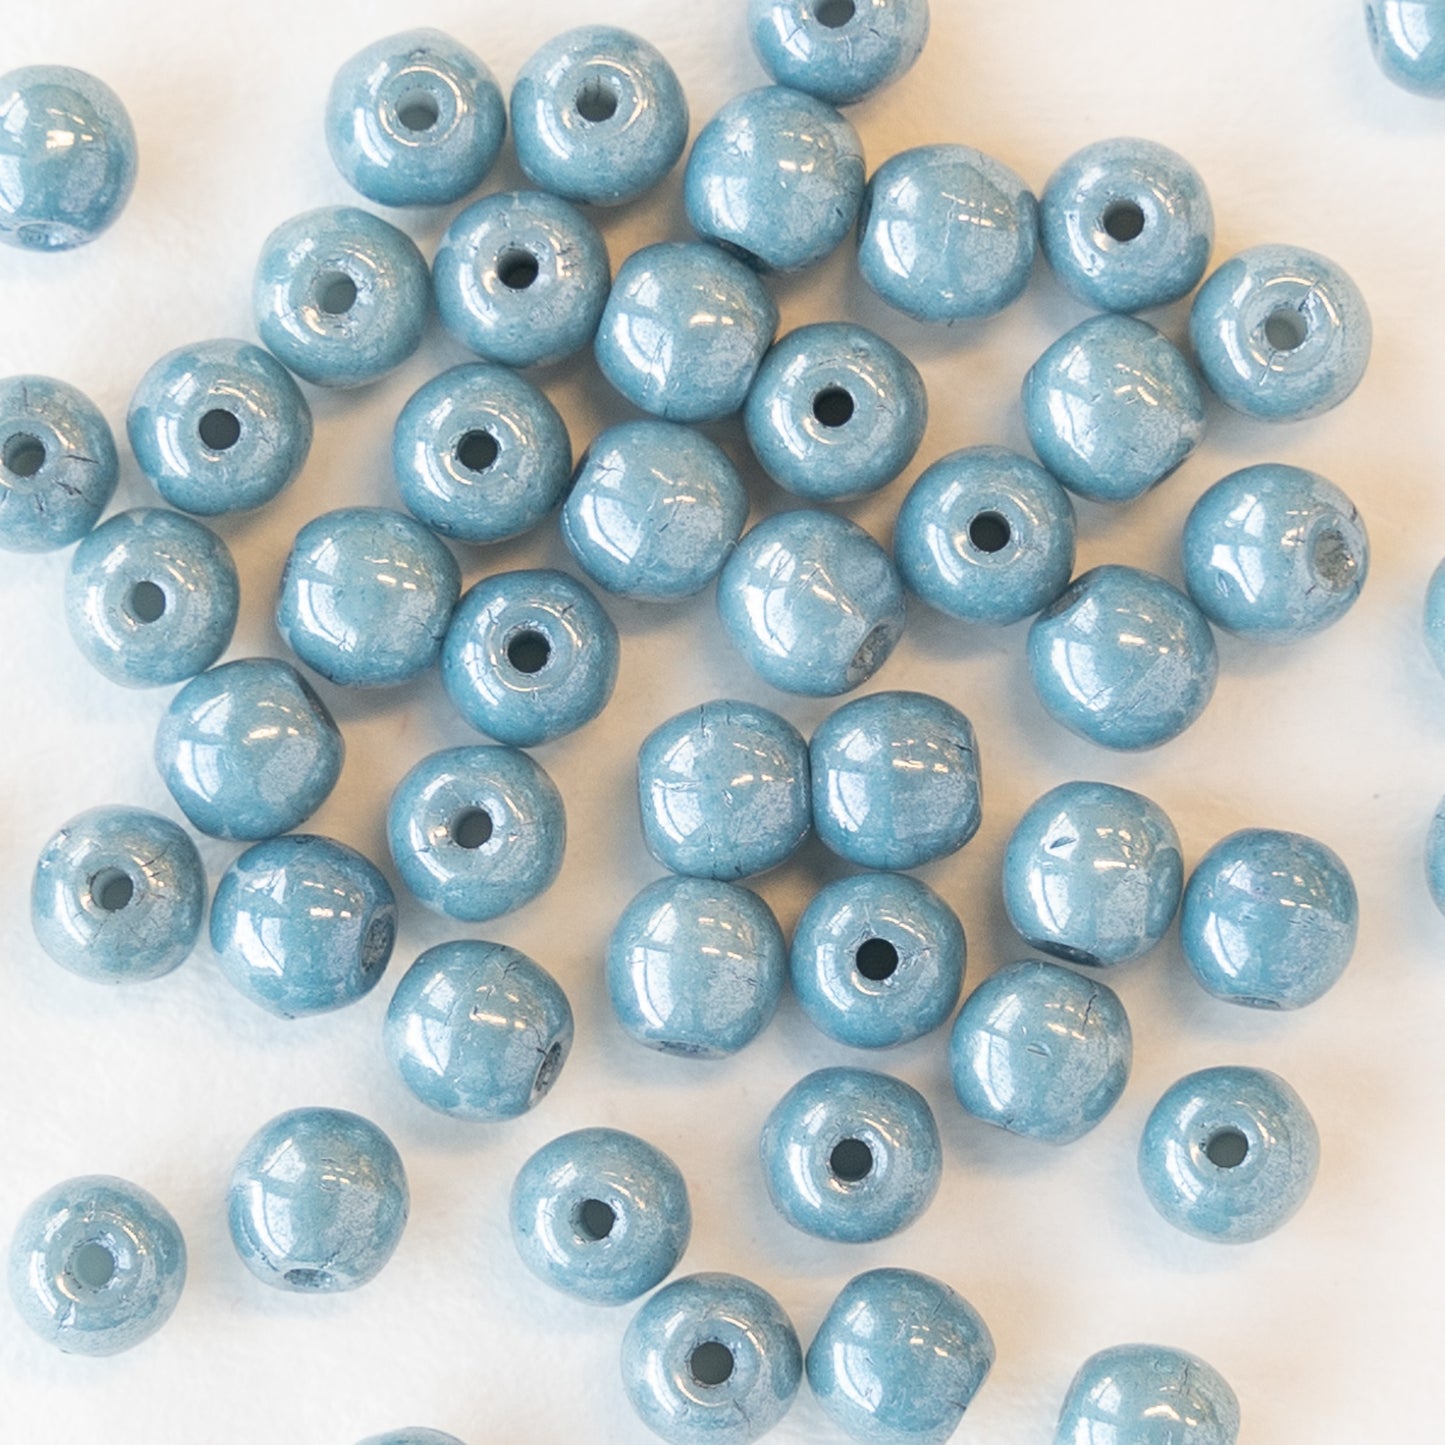 4mm Round Glass Beads - Lt Blue Luster - 50 Beads